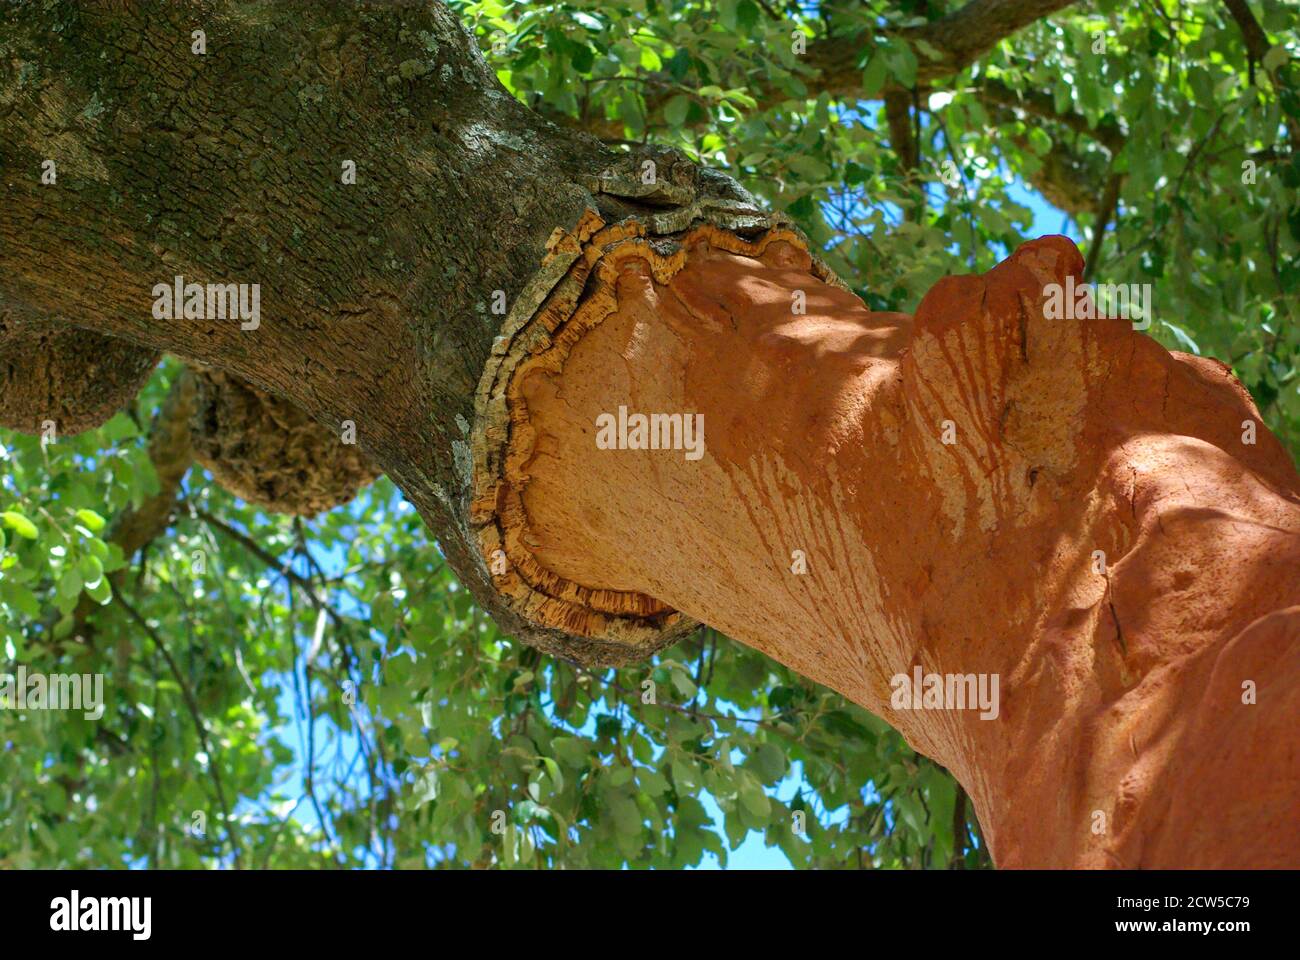 Cork bark is recently harvested from tree showing raw orange interior on bright Summer day. Travel agriculture concepts with negative copy space. Stock Photo